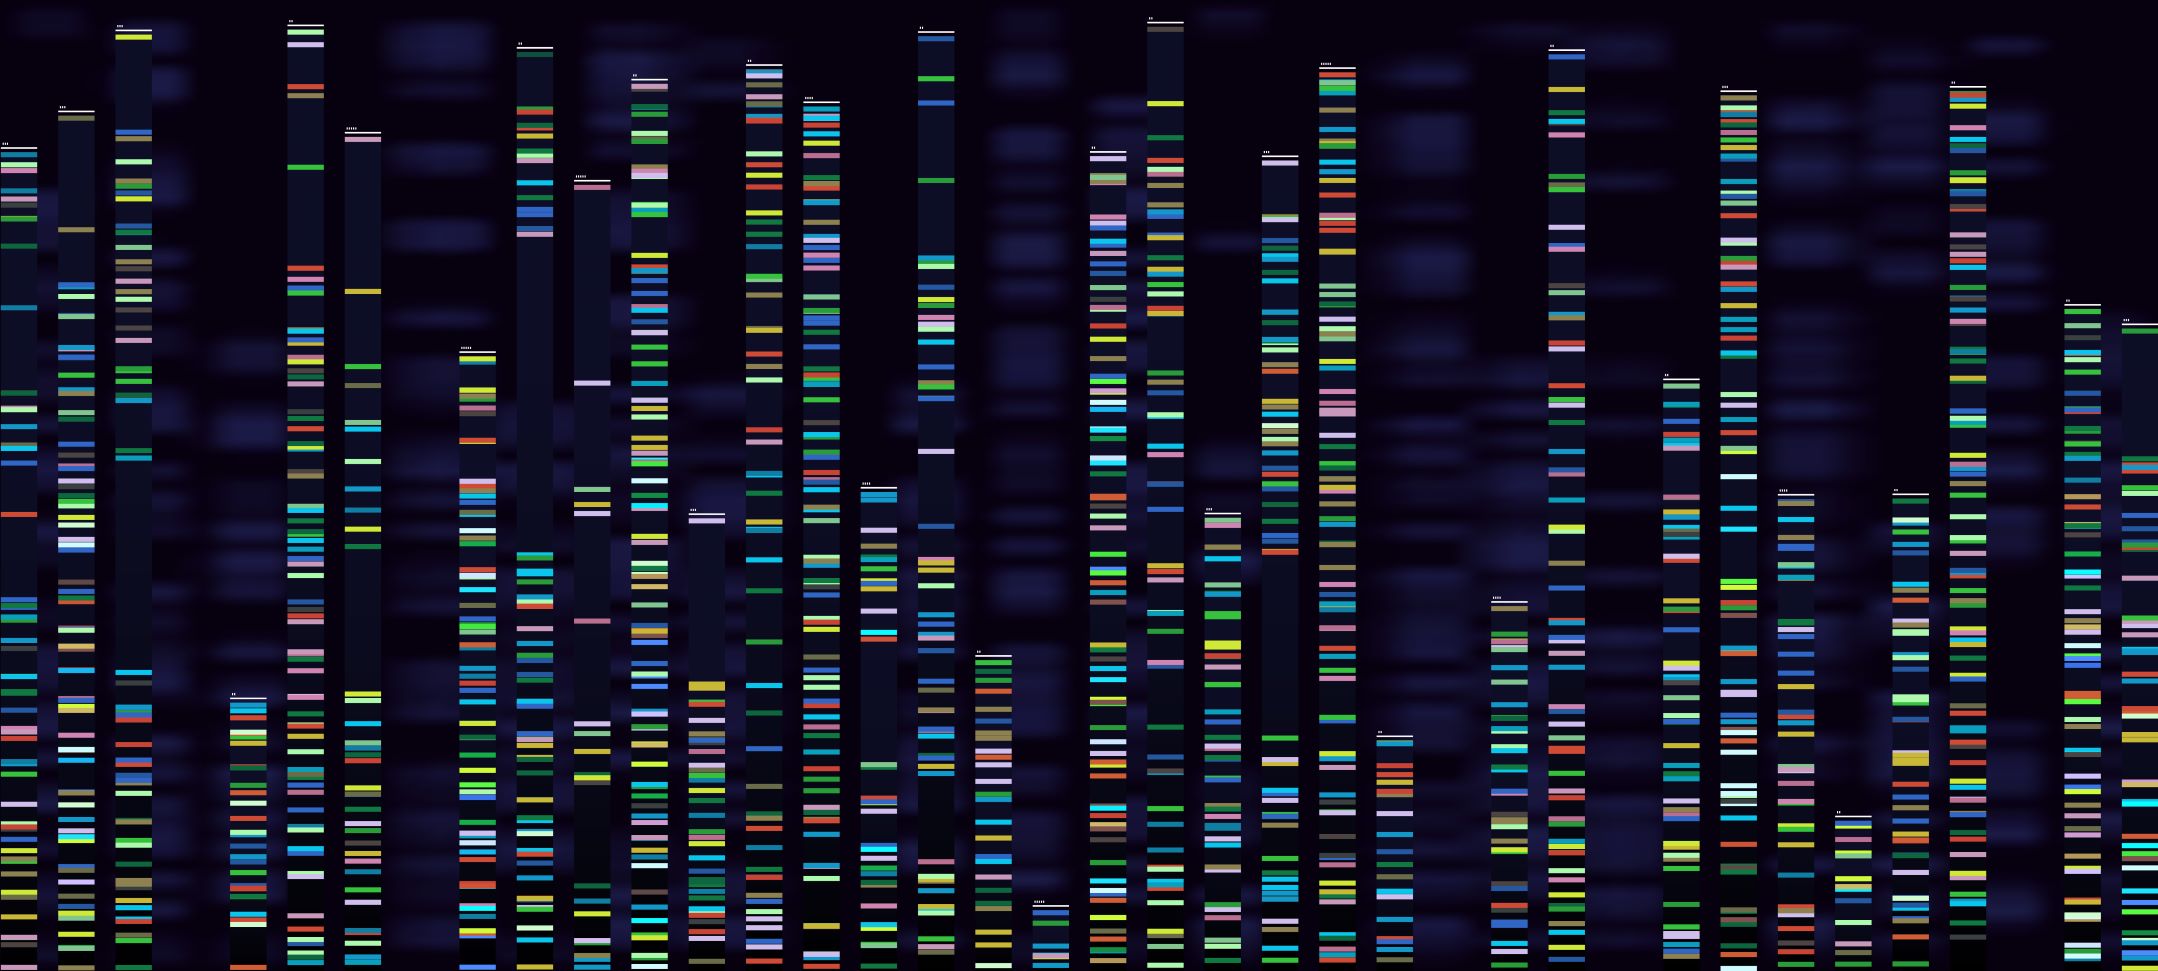 DNA joined and stacked vertically